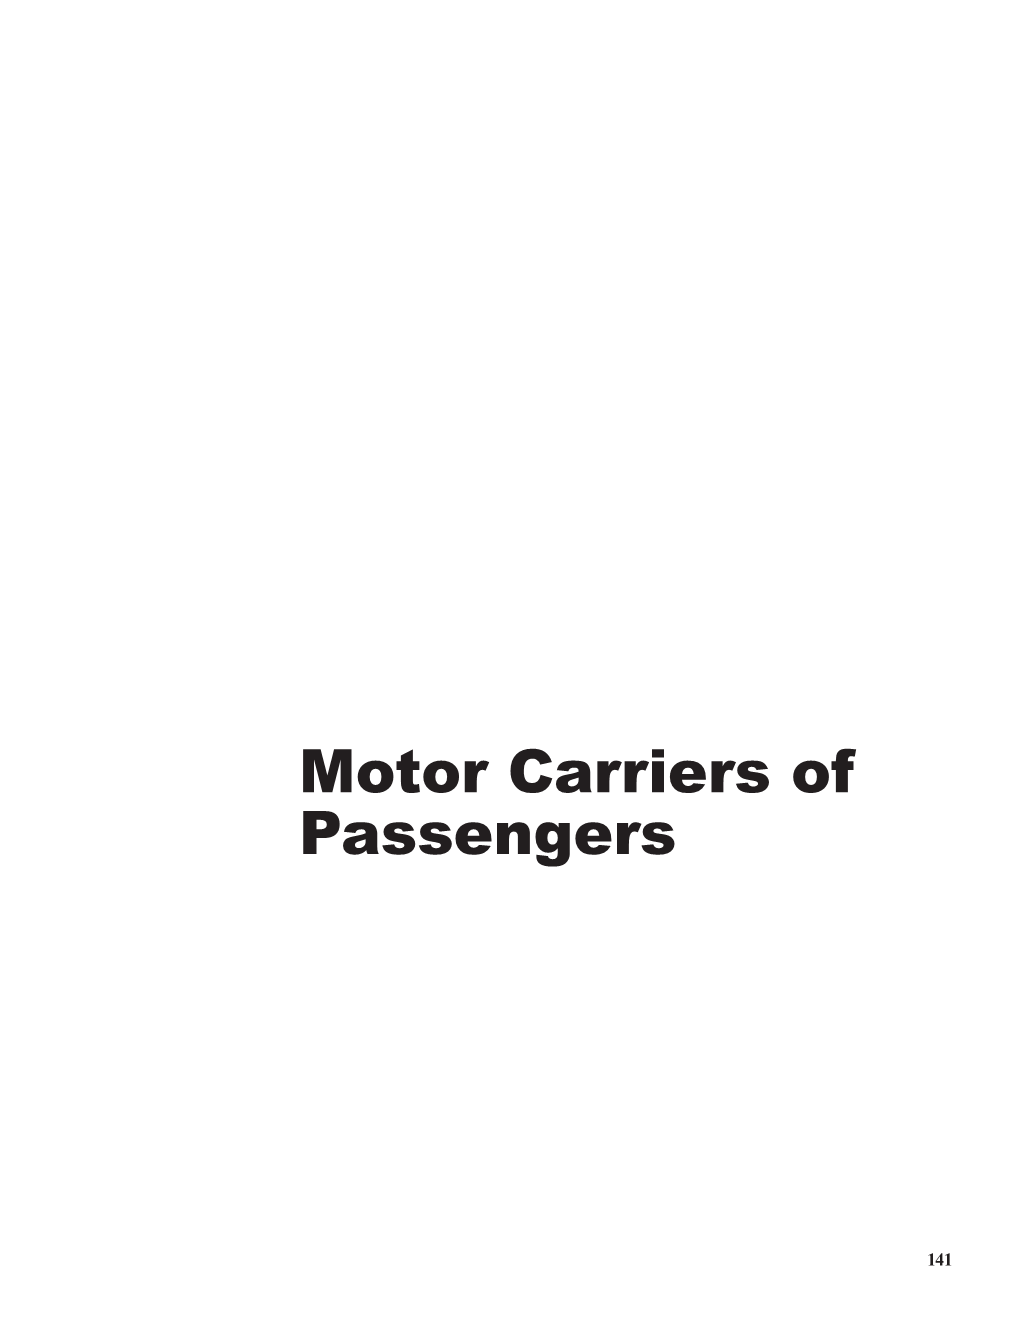 Motor Carriers of Passengers